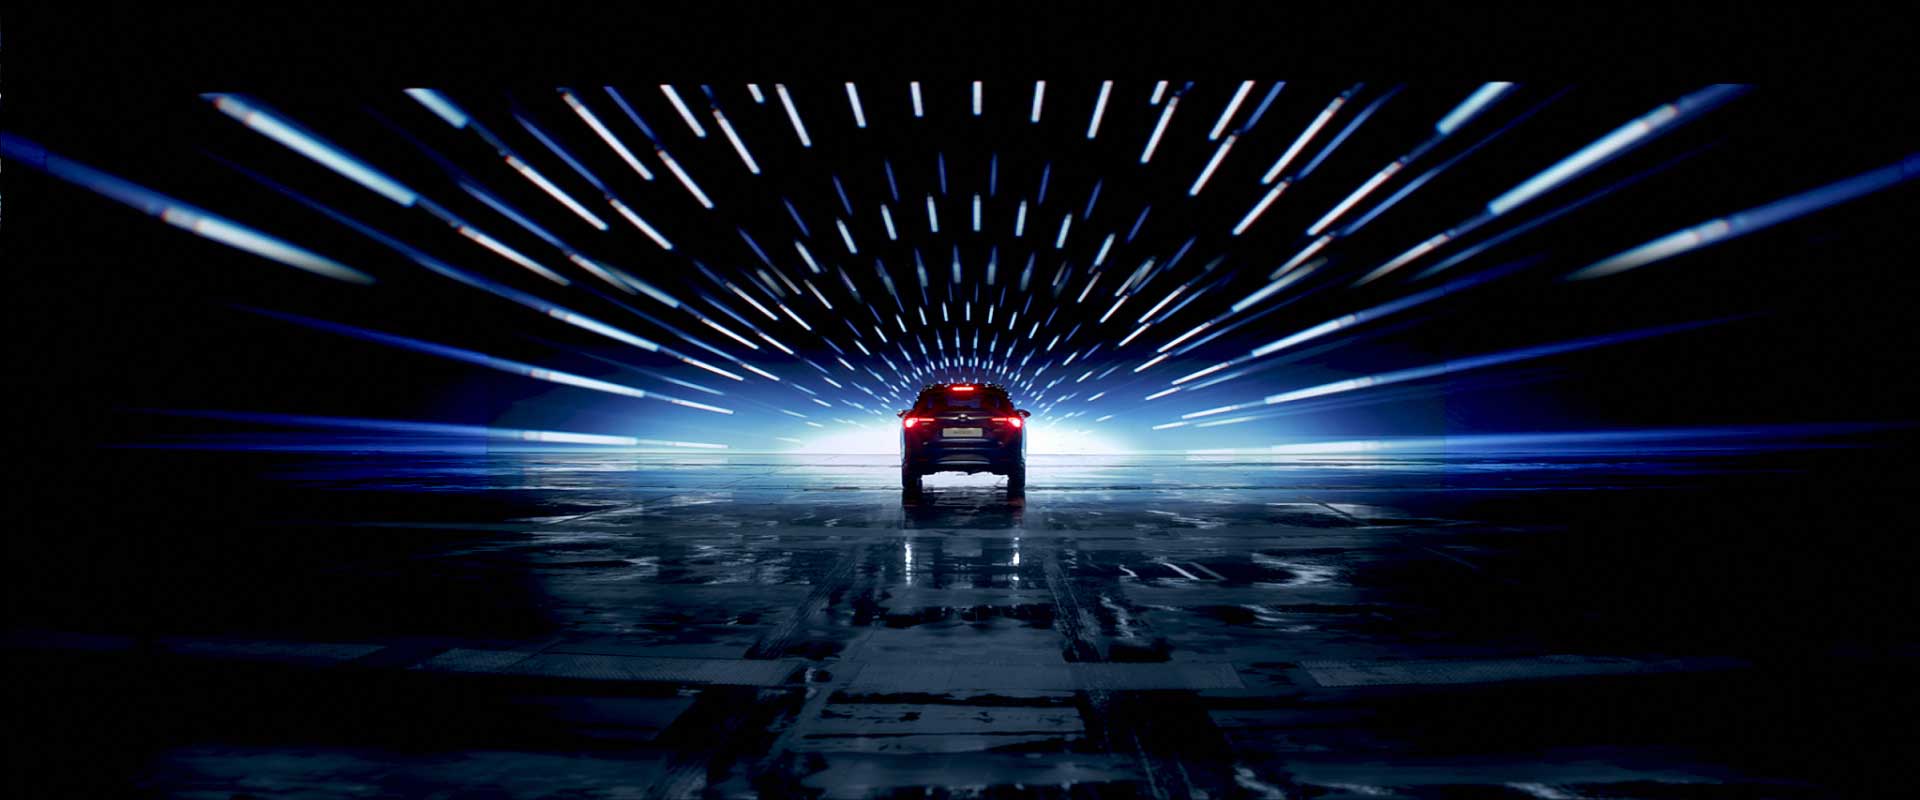 Backview car. Still from Toyota Avensis - Commercial